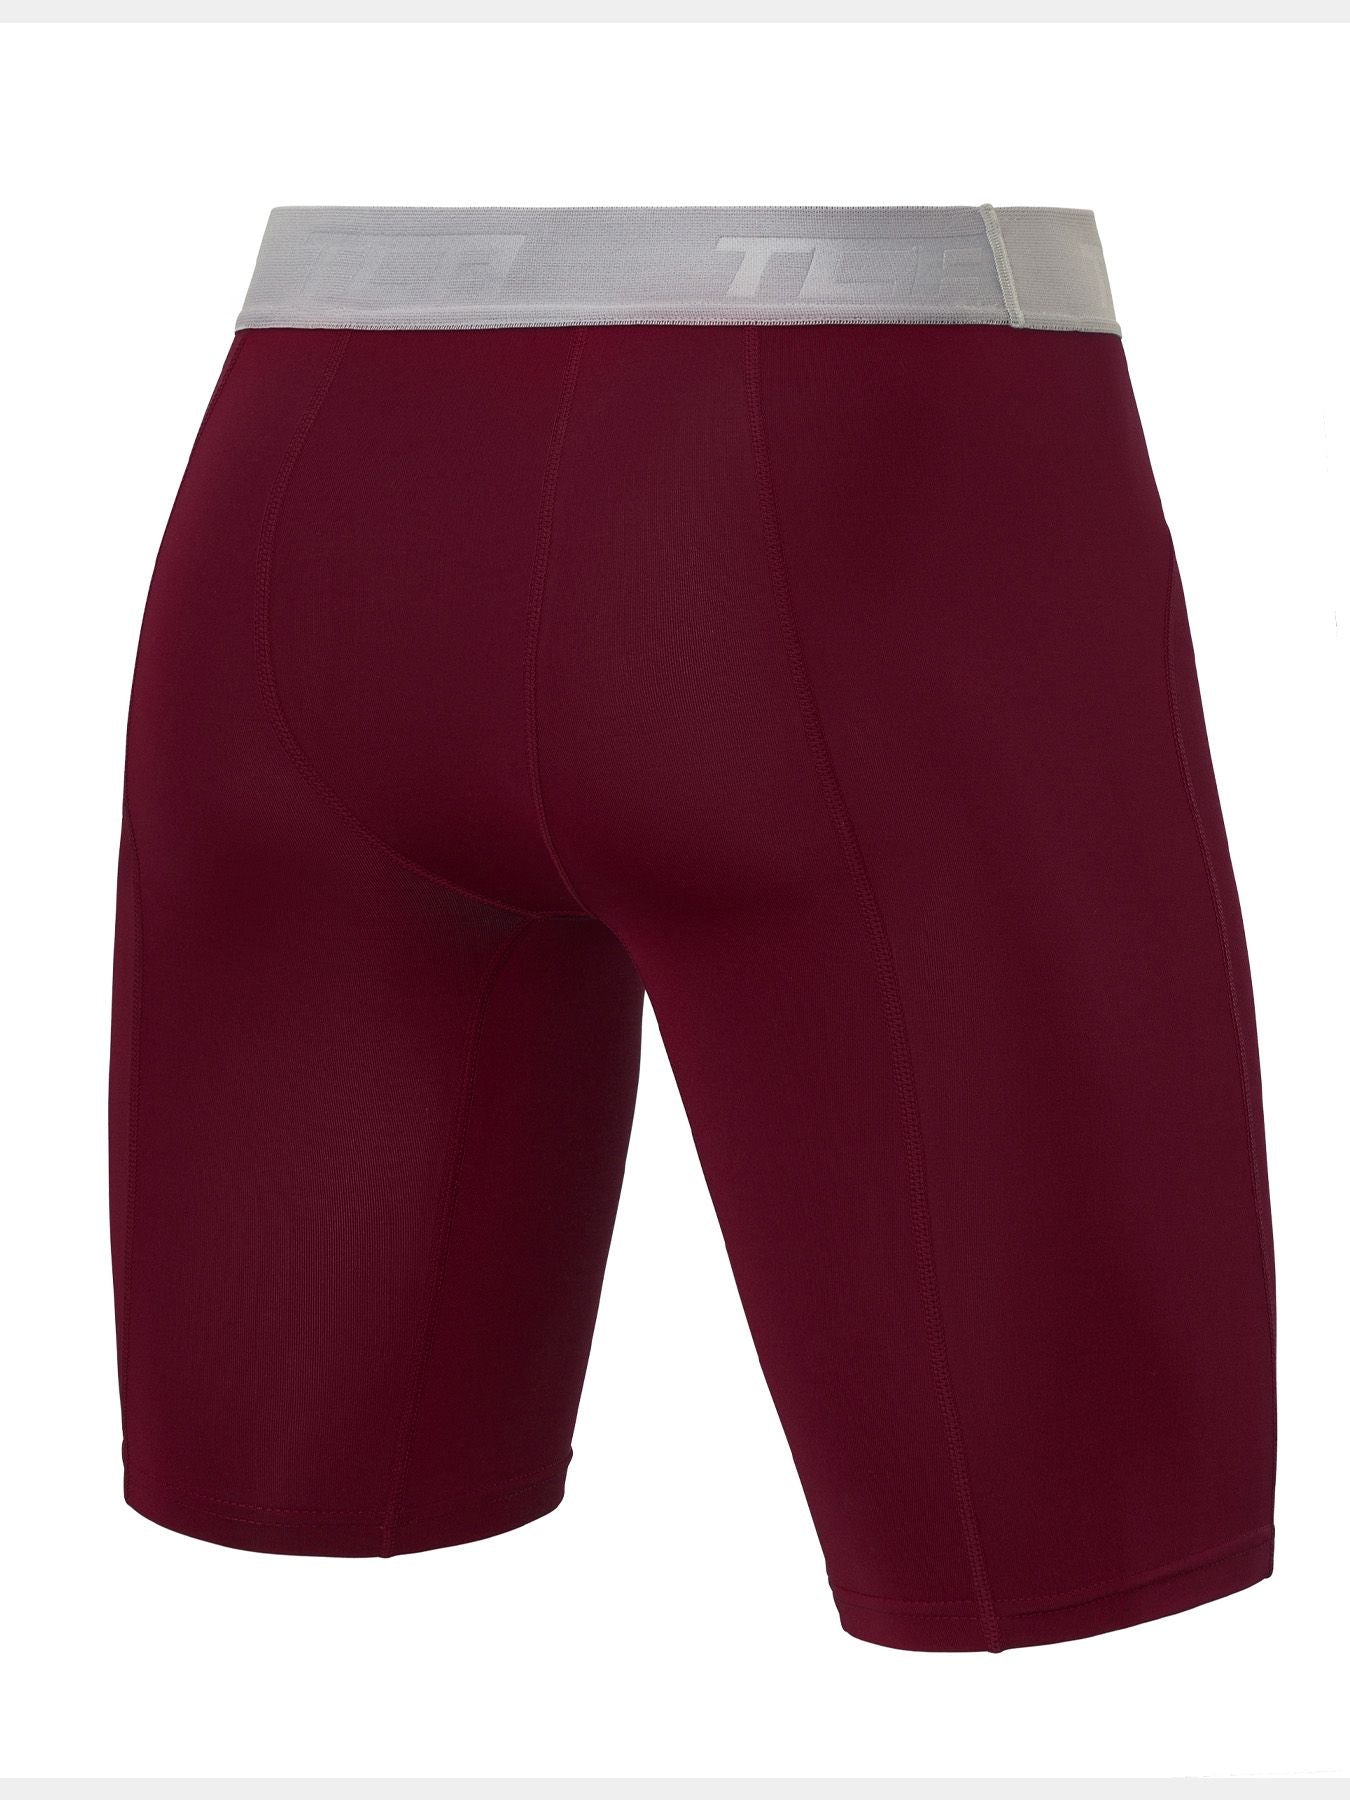 Pro Performance Compression Base Layer Shorts For Boys